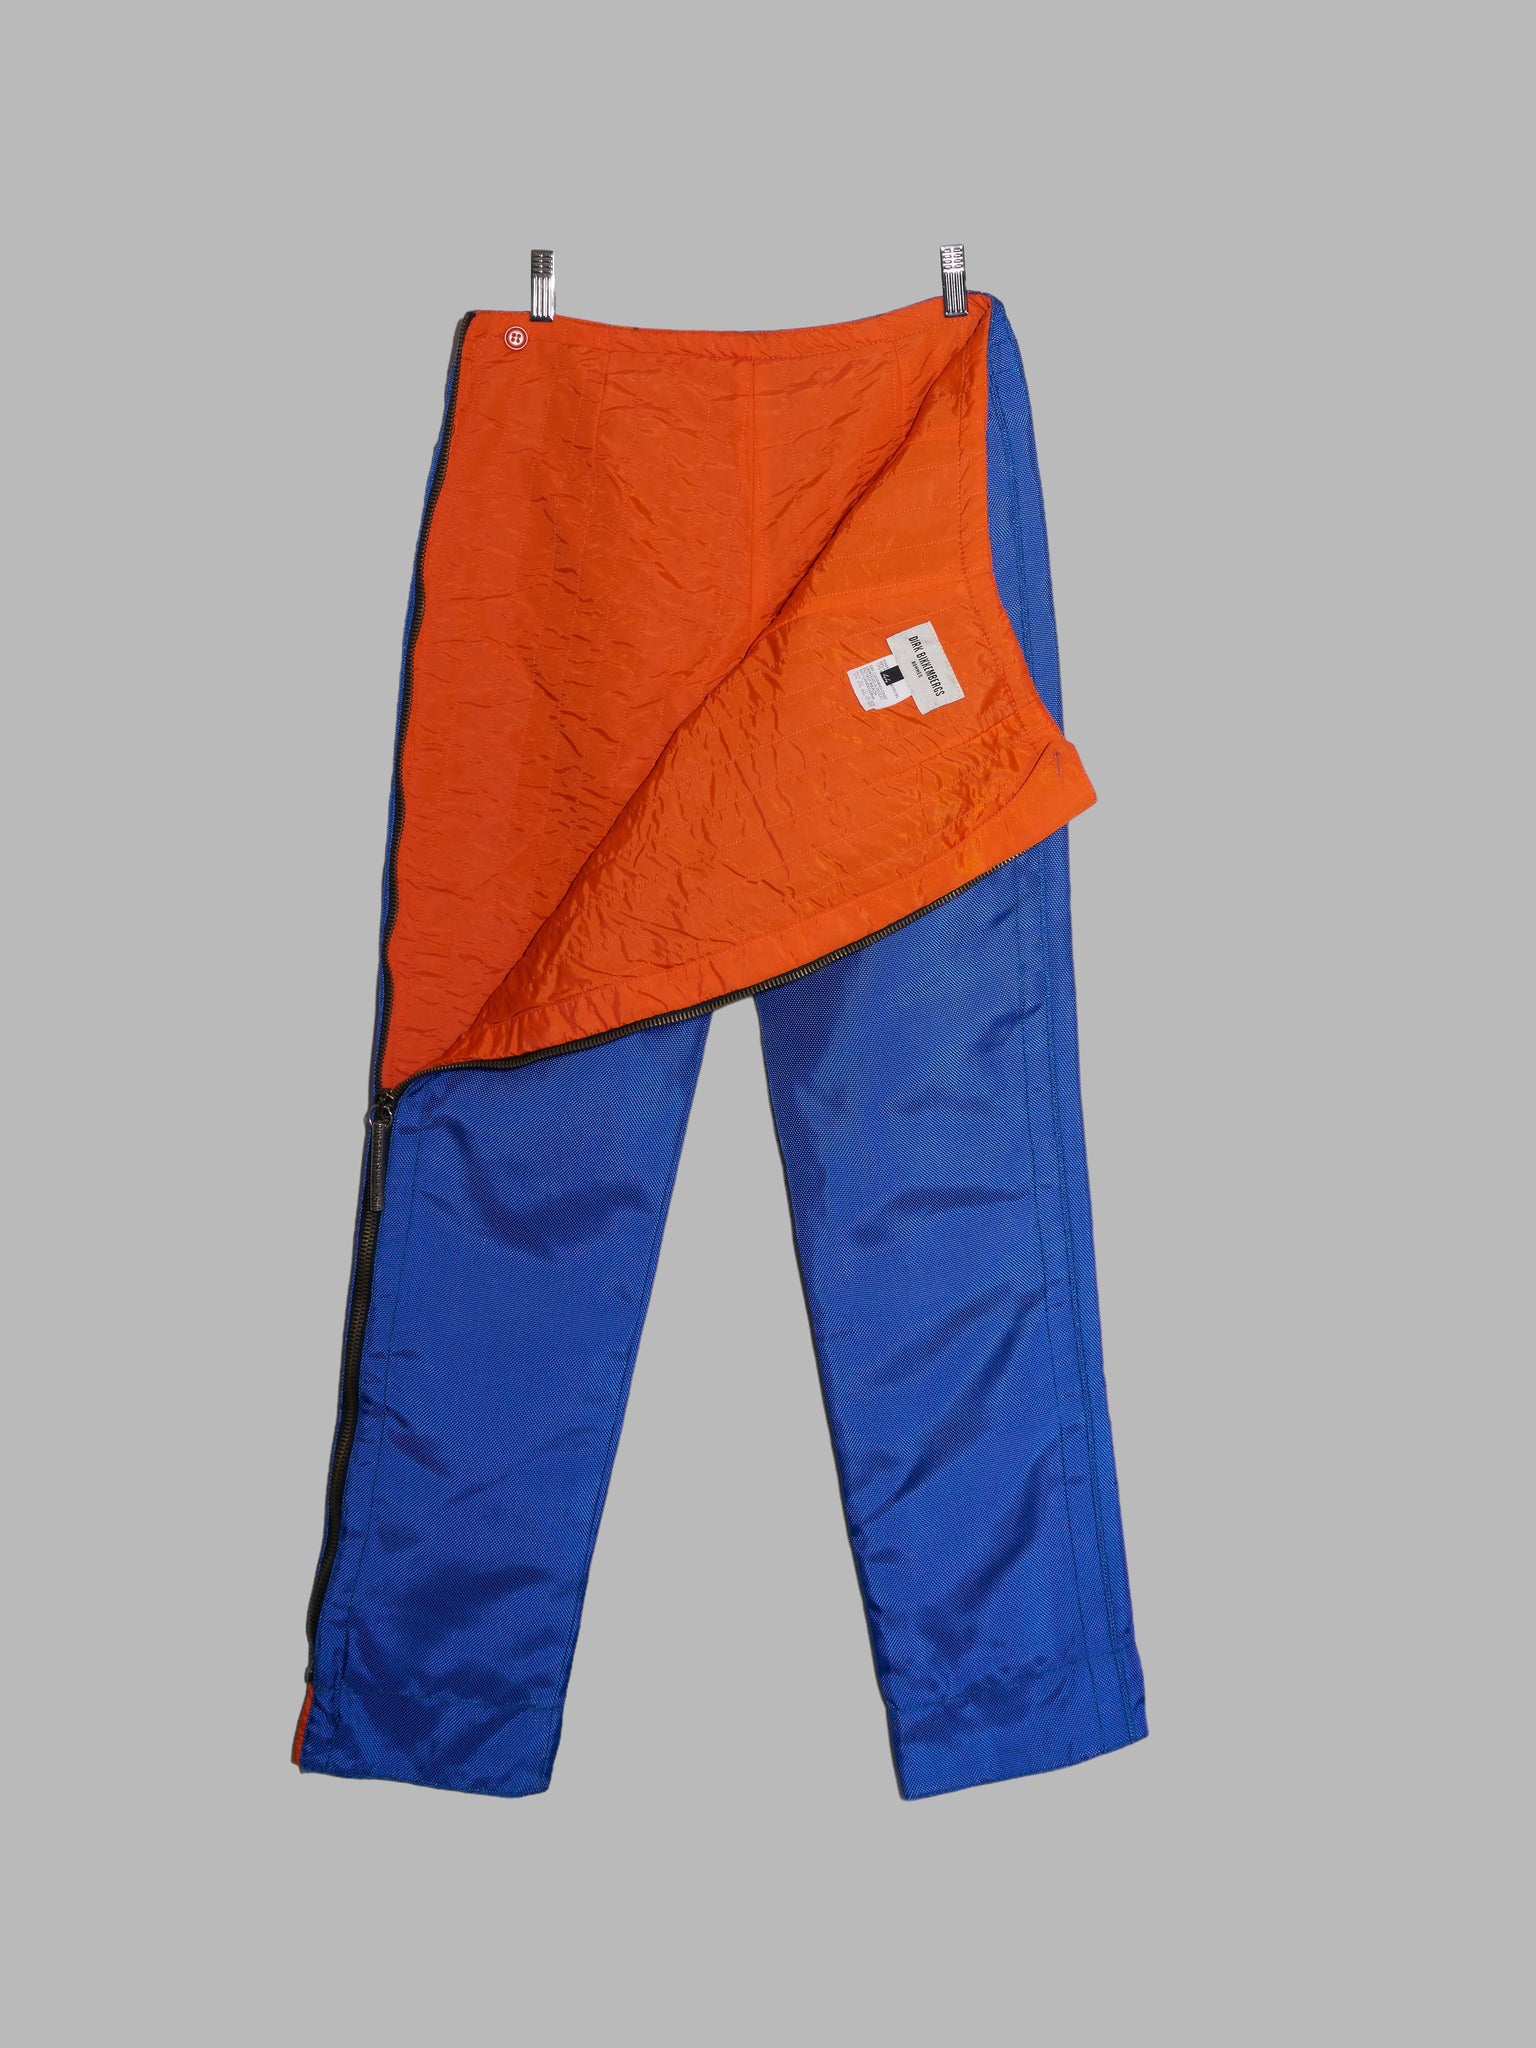 Dirk Bikkembergs Hommes 1990s electric blue ballistic nylon quilted side zip trousers